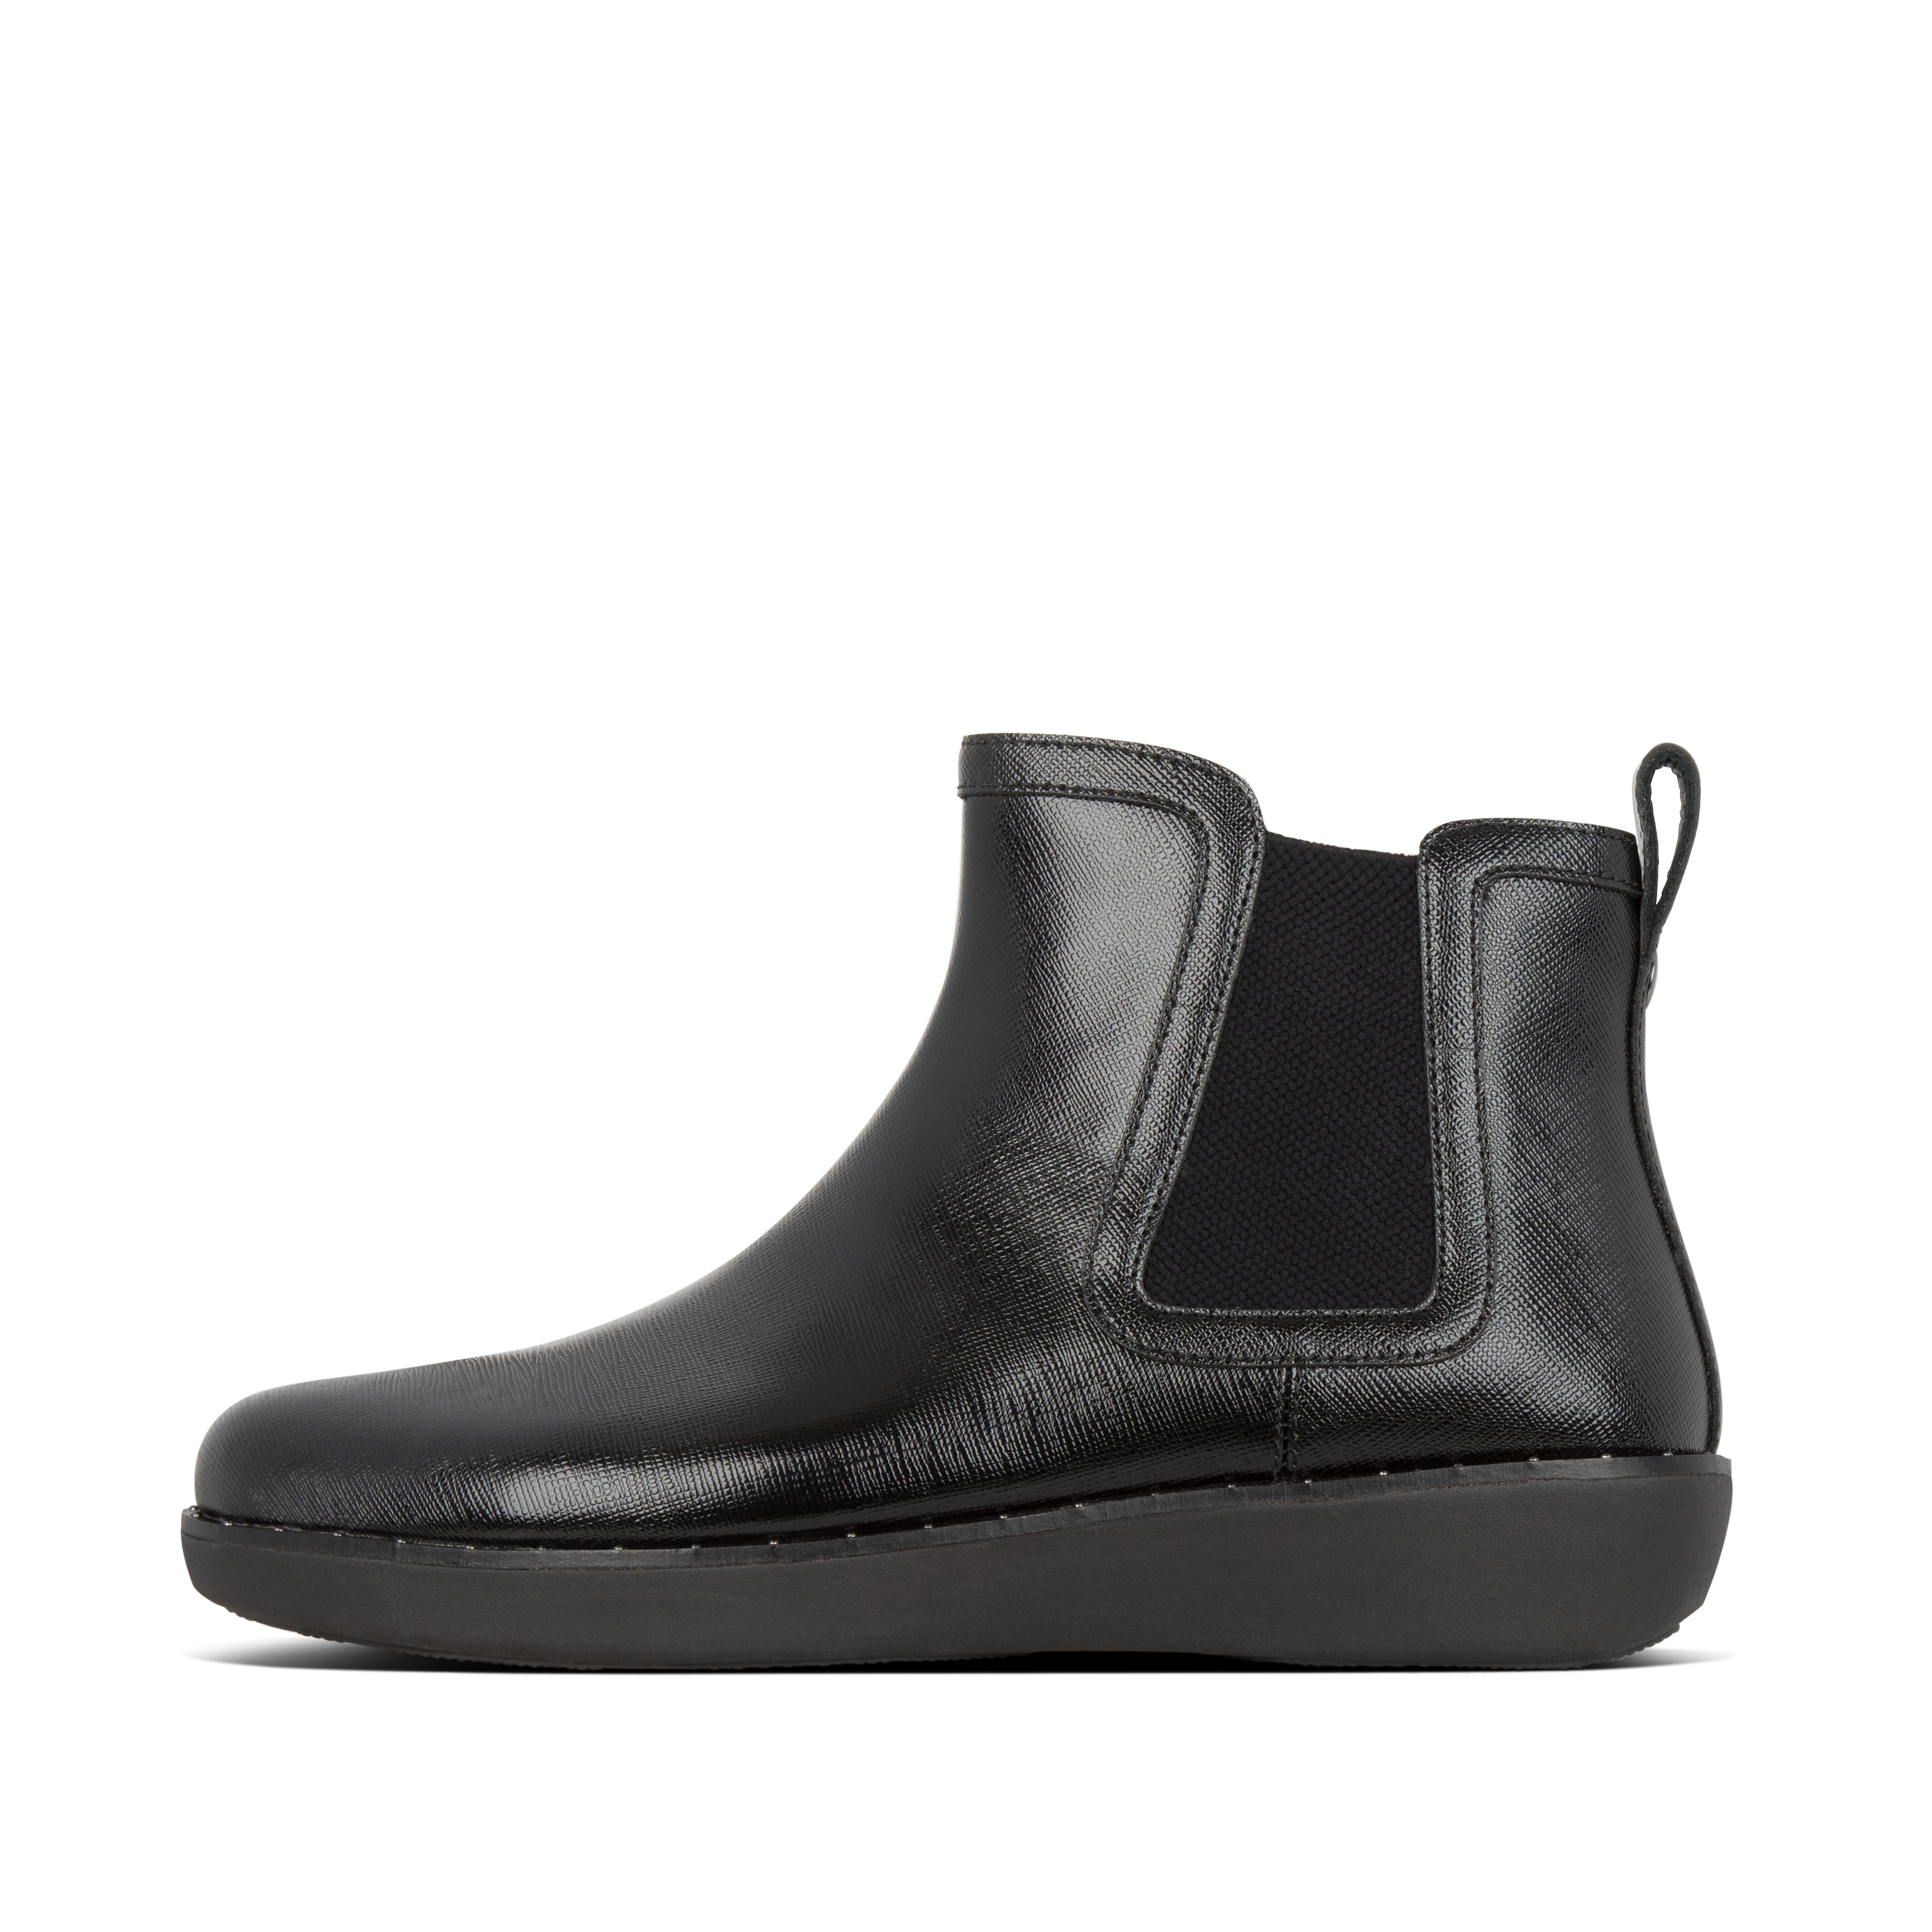 fitflop chelsea boots